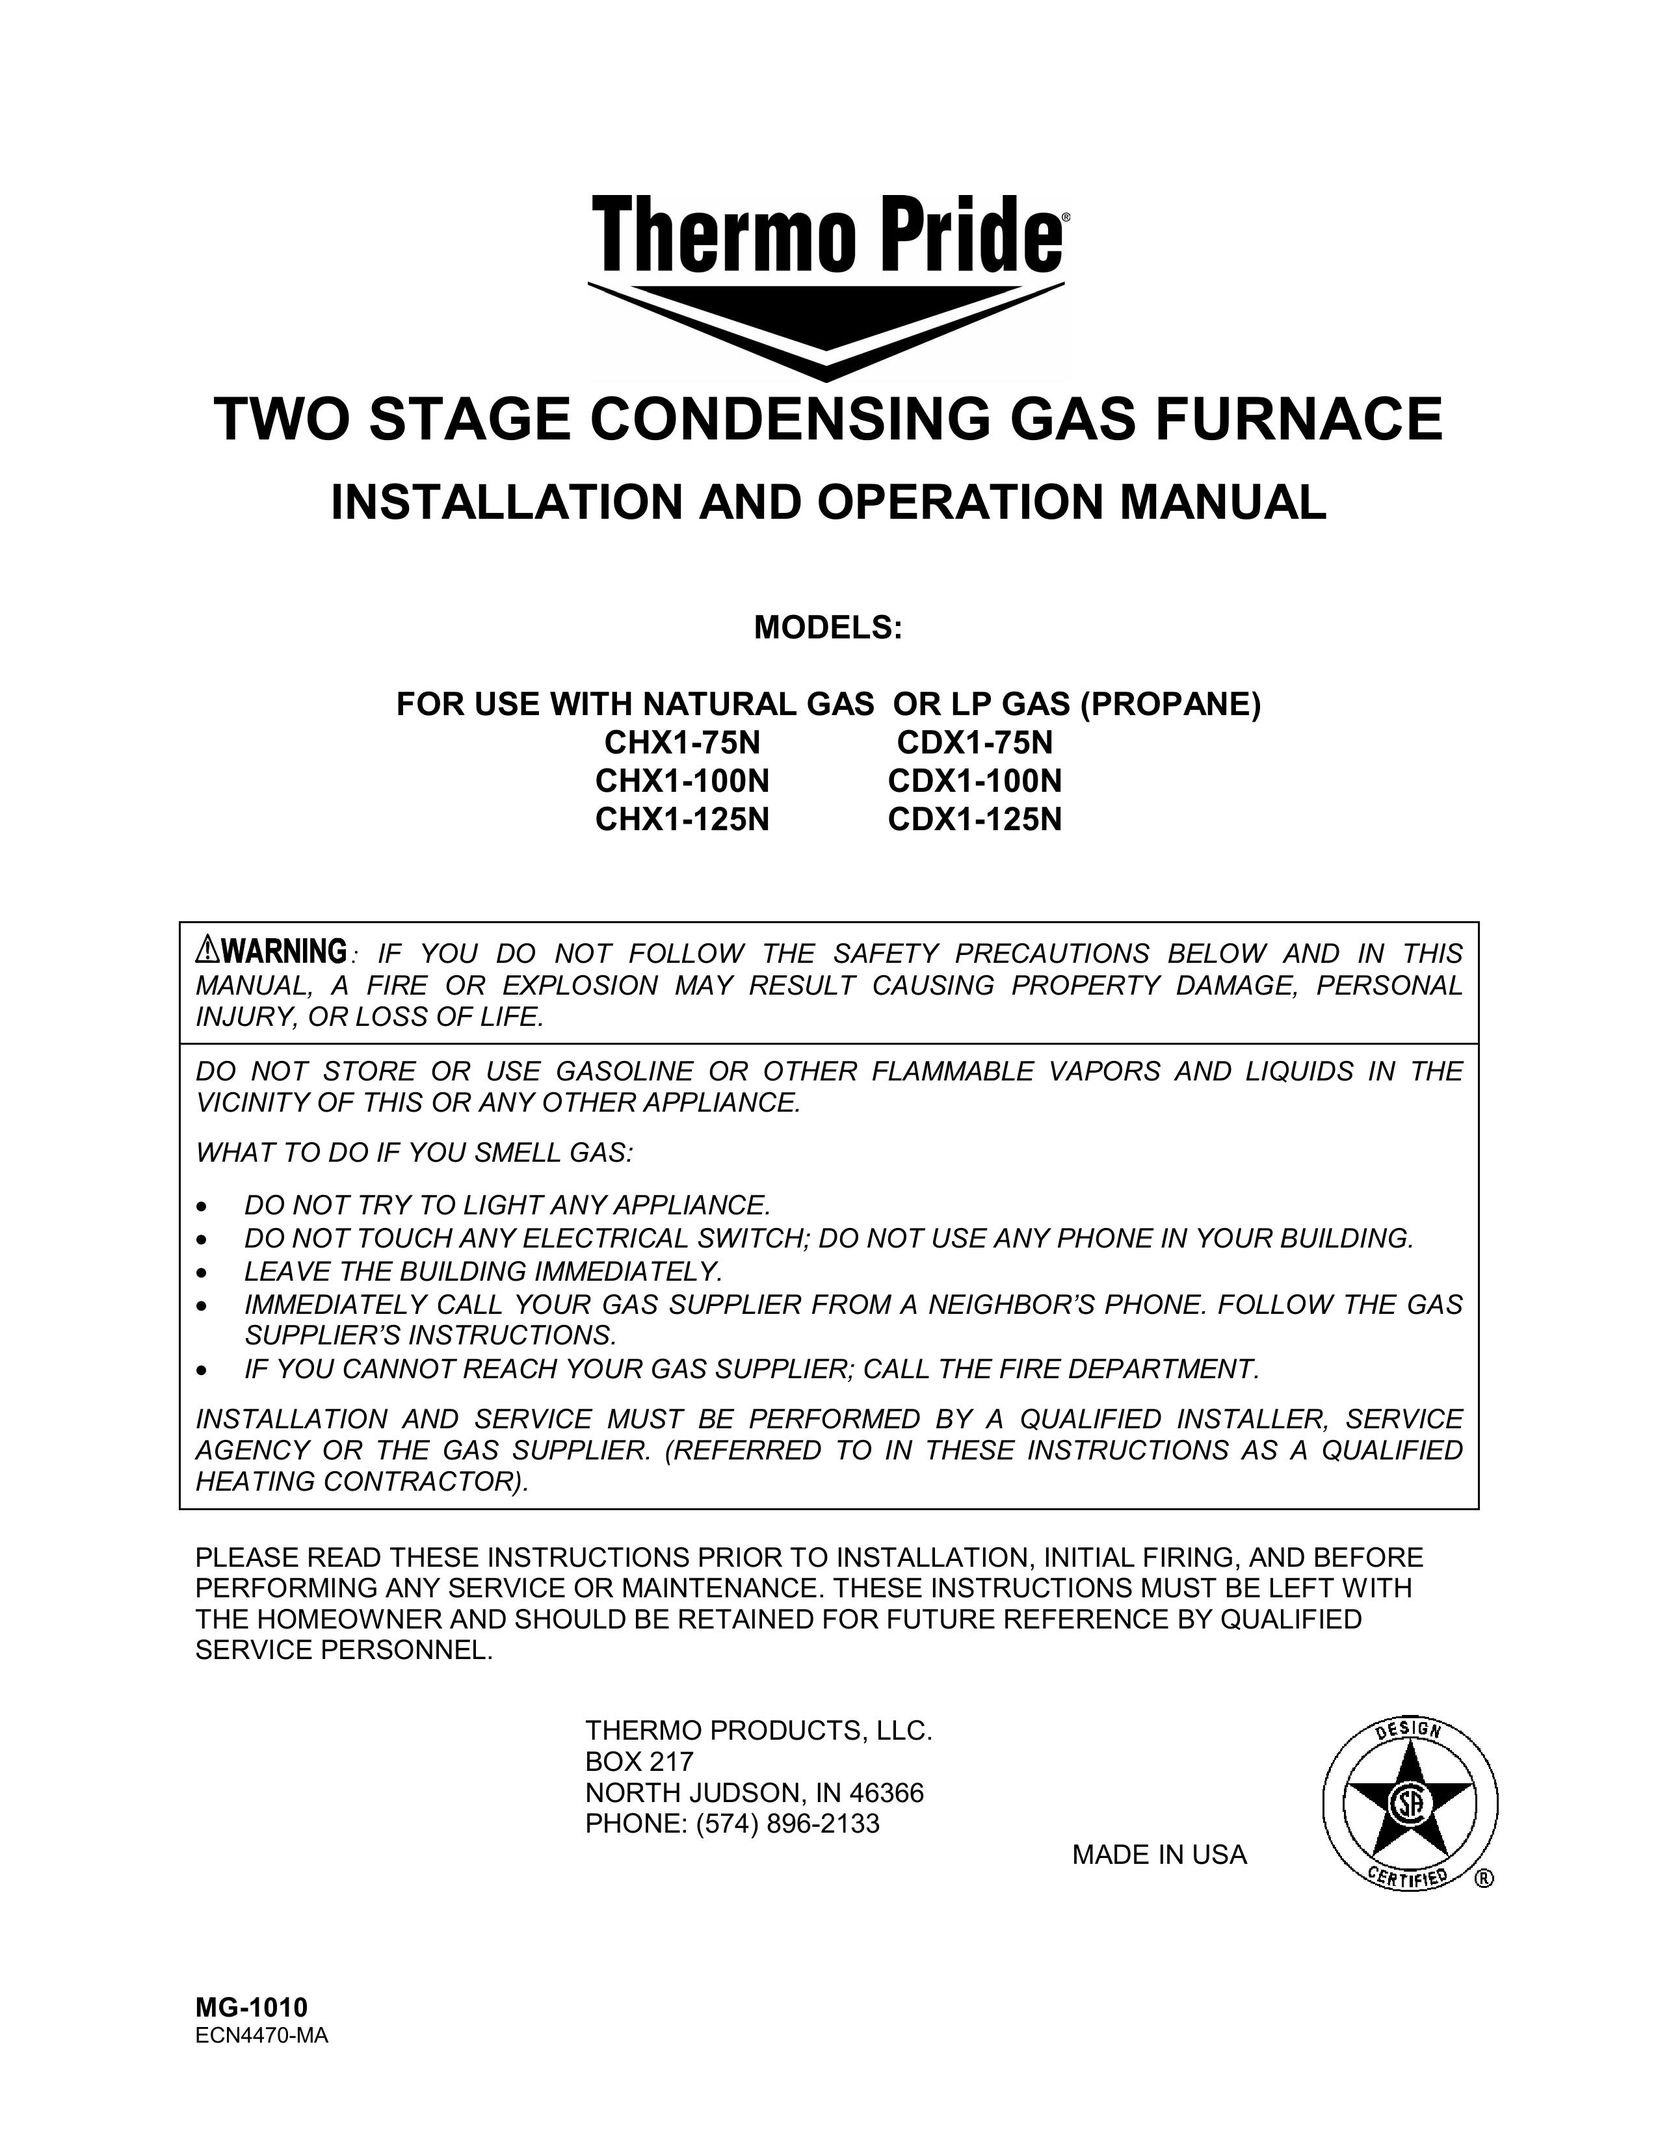 Thermo Products CDX1-75N Furnace User Manual